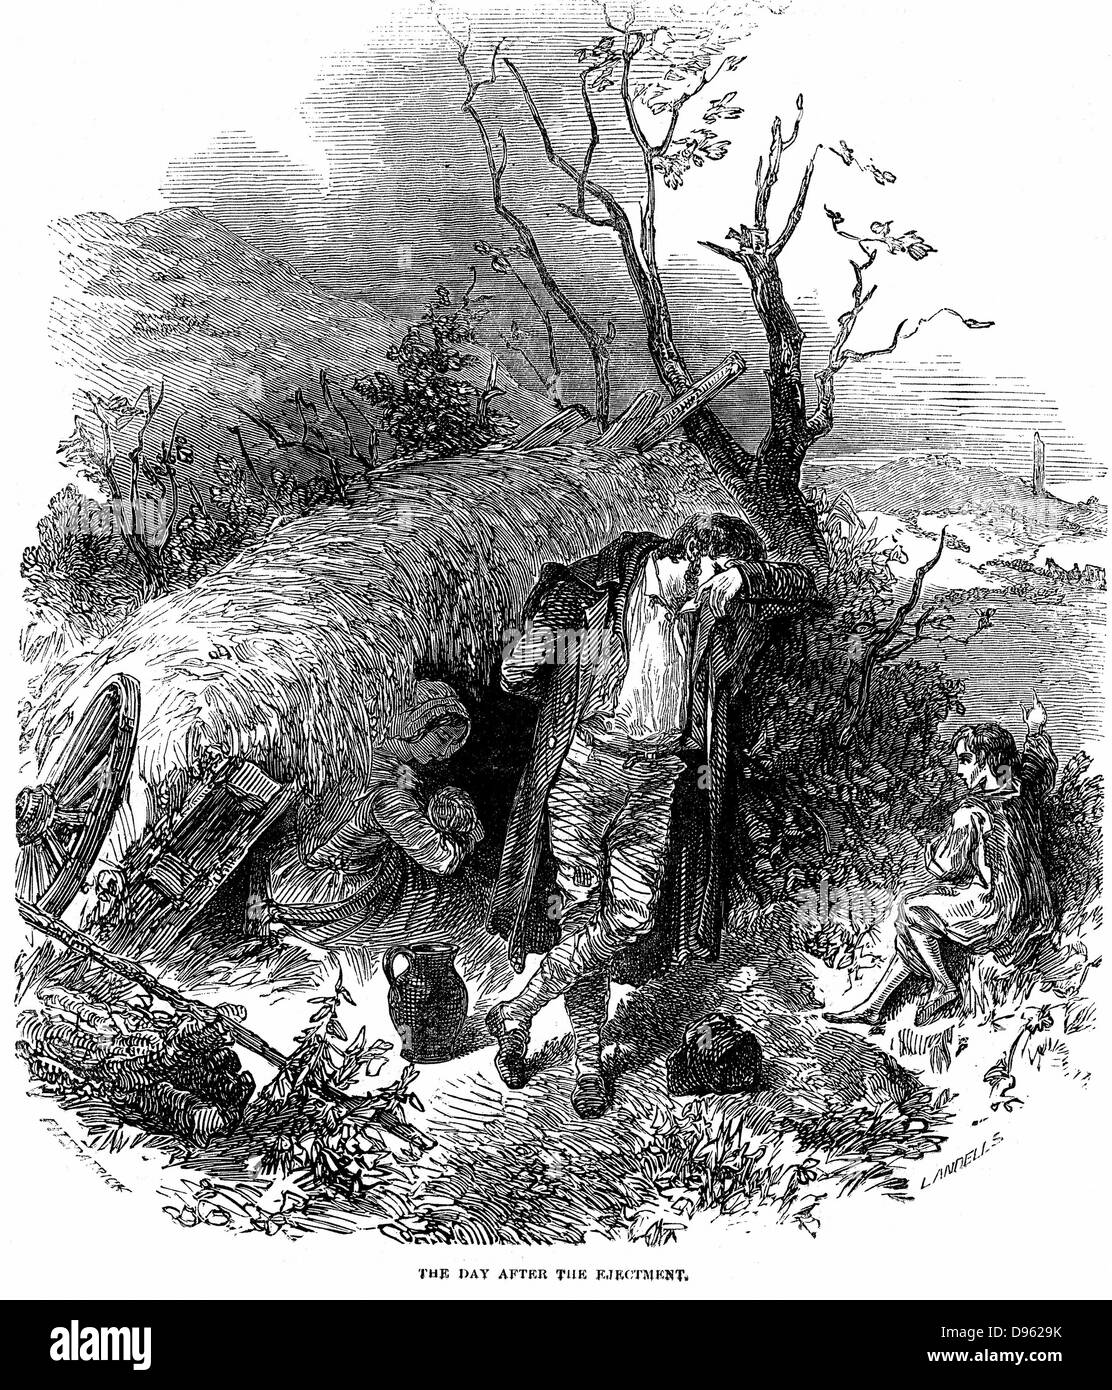 Potato Famine: Irish peasant family unable to pay rent because of failure of the potato crop due to Potato Blight (Phytophthora infestans), finding shelter in a hedgerow the day after eviction from their cottage.  From 'The Illustrated London News', December 1848. Wood engraving. Stock Photo